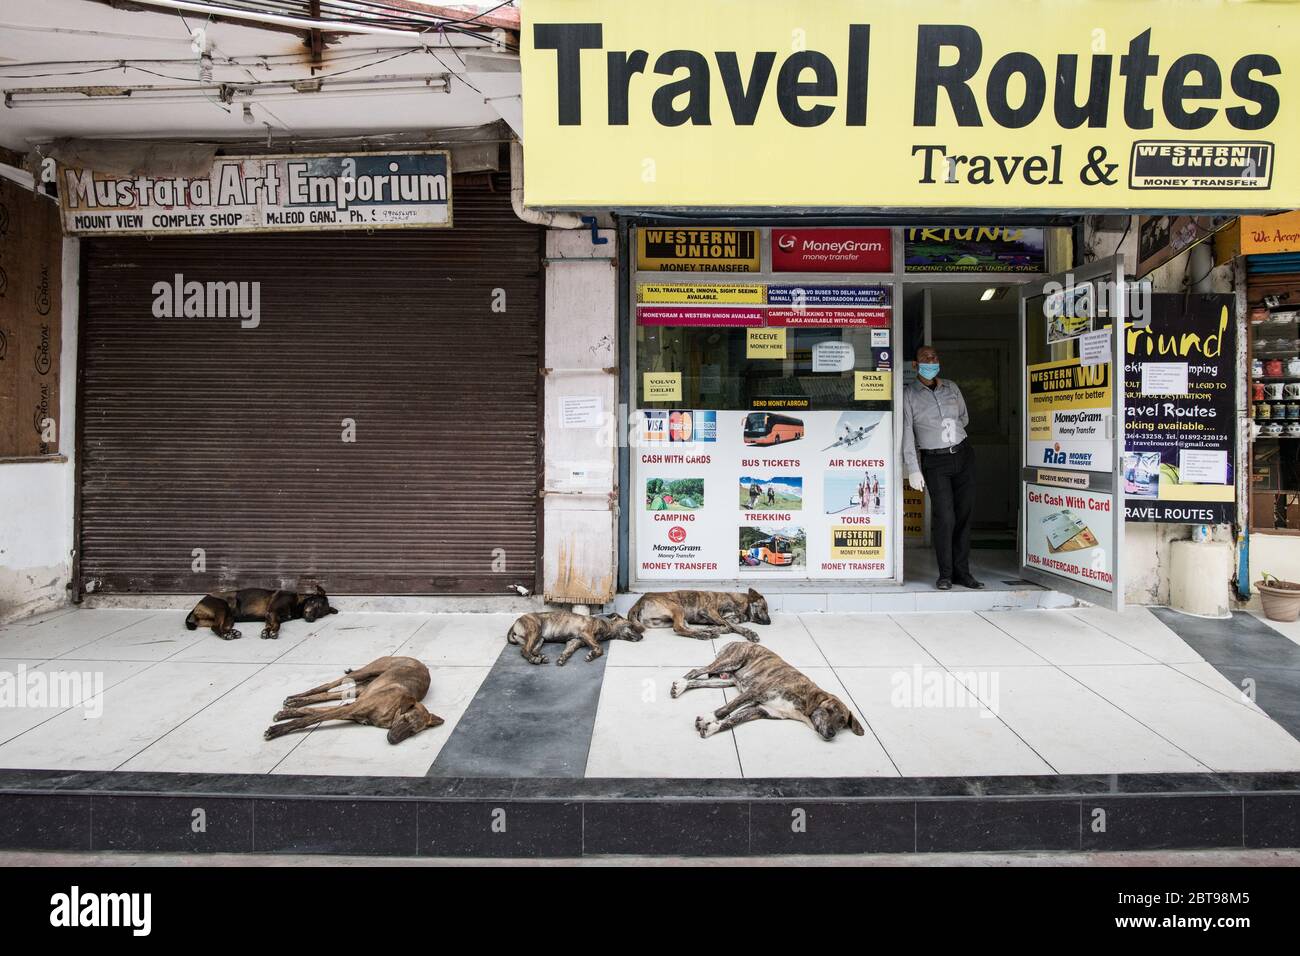 Travel agent awaits customers during the coronavirus COVID 19 pandemic. Travel in India has come to a complete halt. Dharamshala, India. Stock Photo